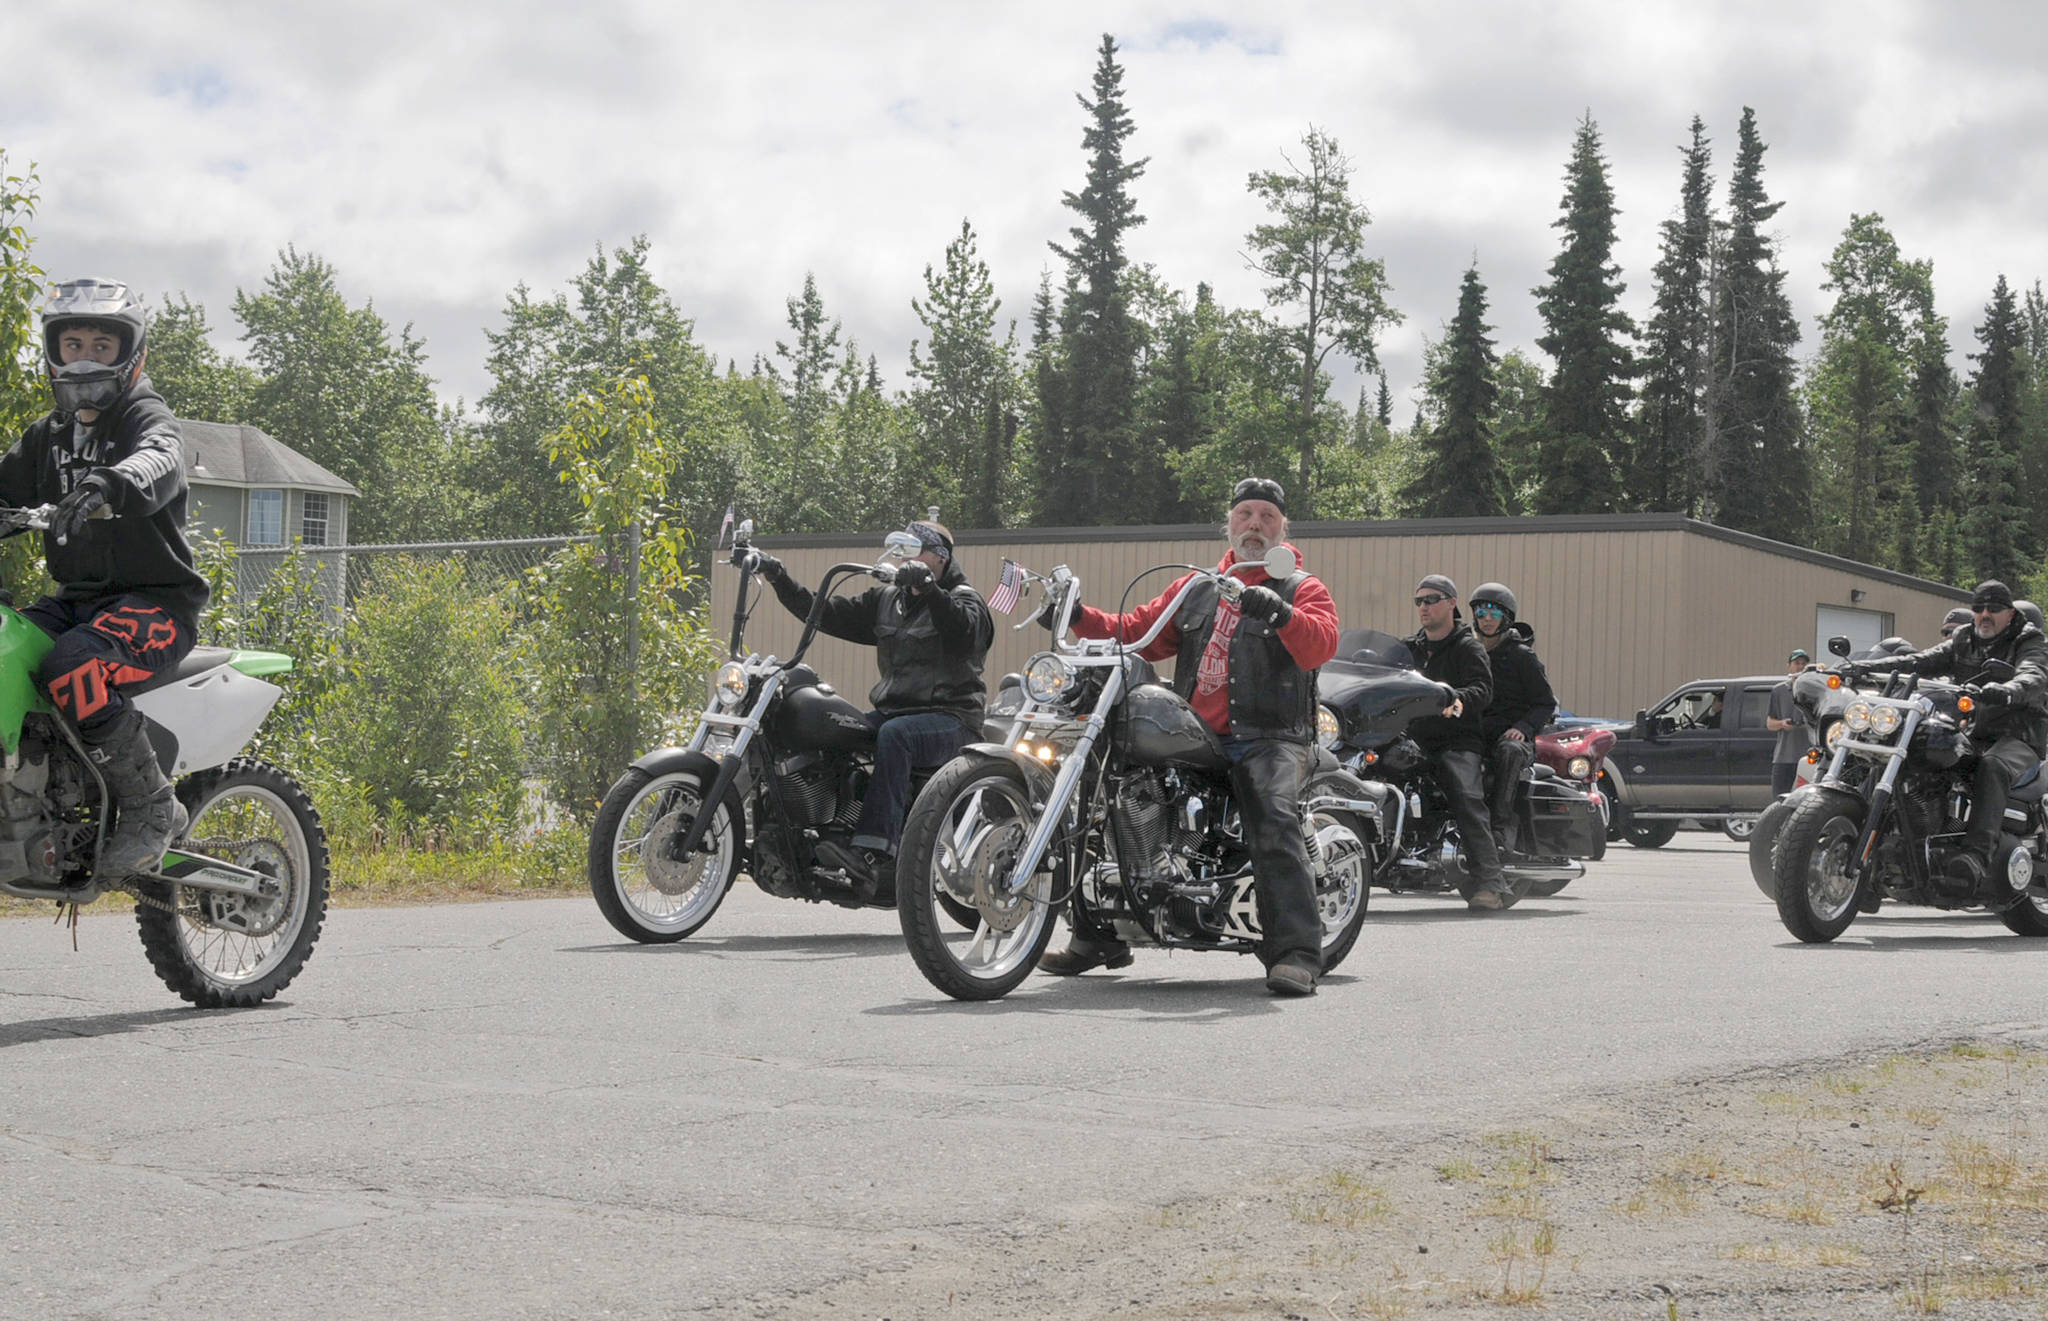 Motorcyclists line up as part of a procession to Travis Stubblefield’s memorial service at the driveway of the Harley-Davidson Motorcycles store on Saturday, June 30, 2018 in Soldotna, Alaska. Stubblefield, a lifelong resident of the Soldotna area, was killed June 21 in a conflict in Kasilof. Alaska State Troopers are investigating the circumstances of his death, though no charges have yet been filed. (Photo by Elizabeth Earl/Peninsula Clarion)